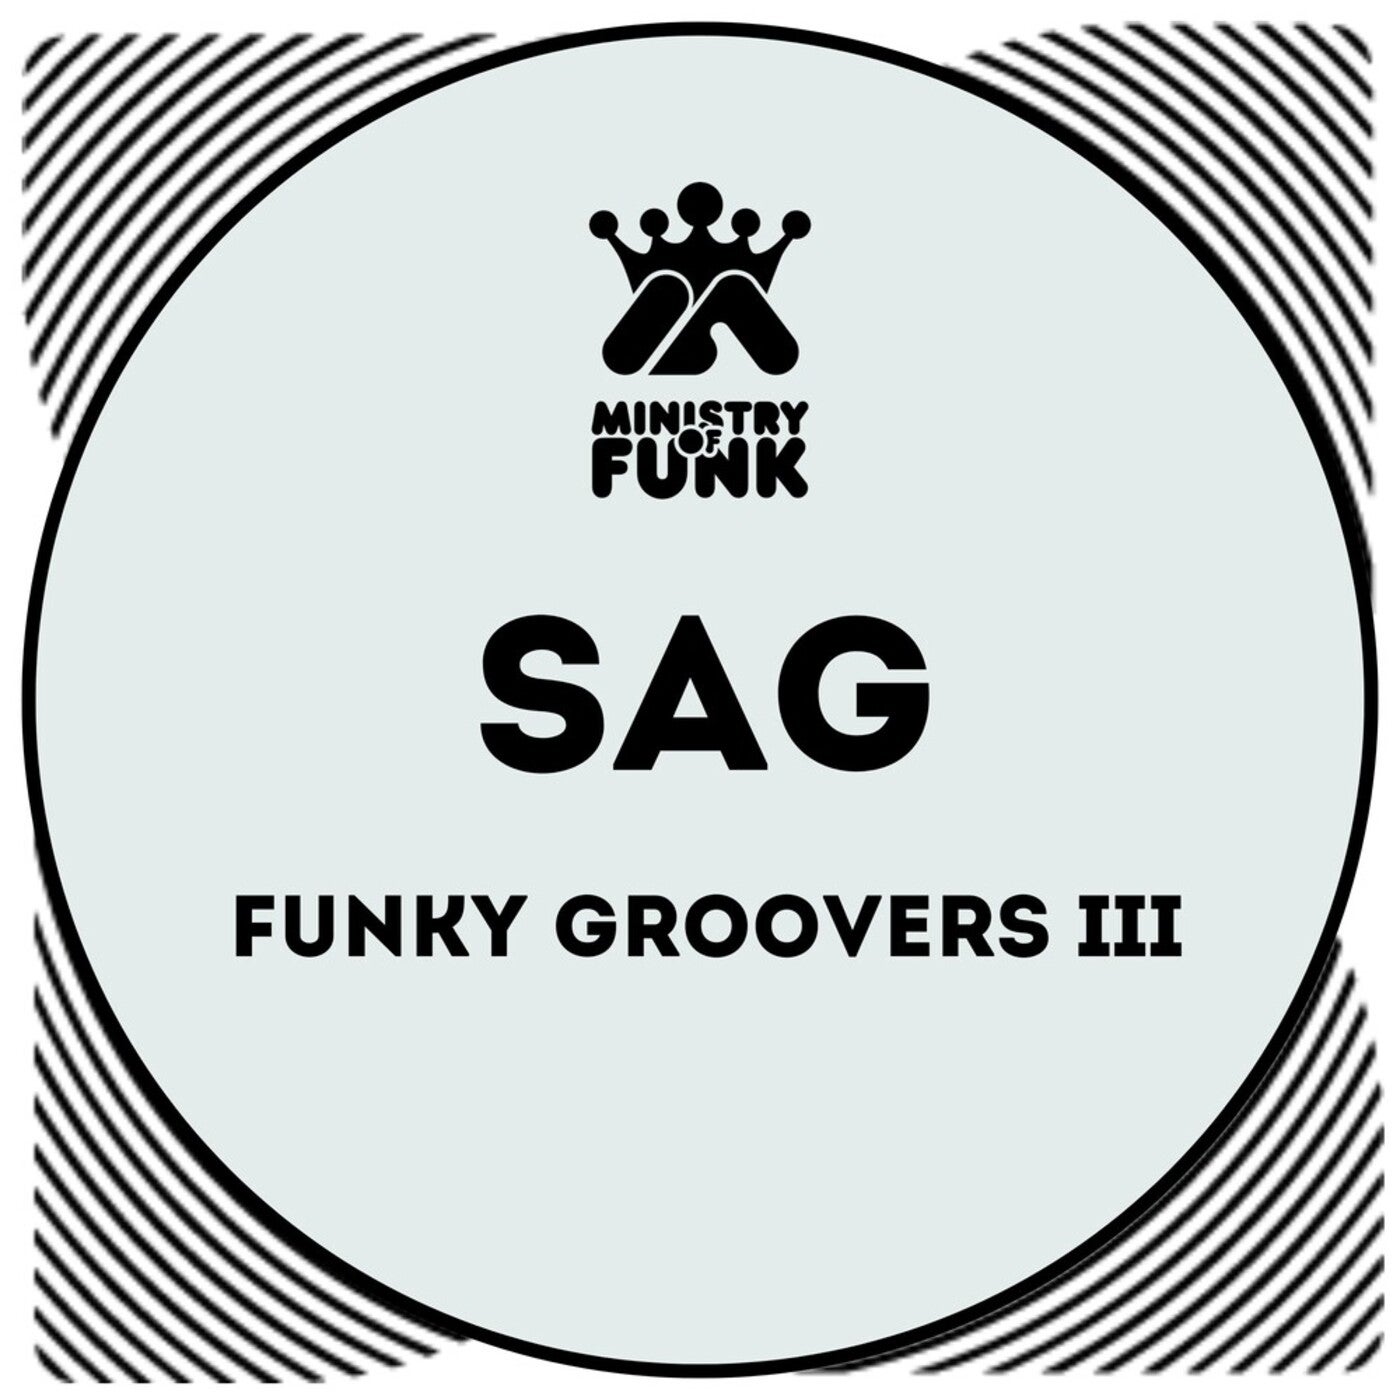 Ministry Of Funk Funky Groovers Iii South American Grooves Music Downloads On Beatport